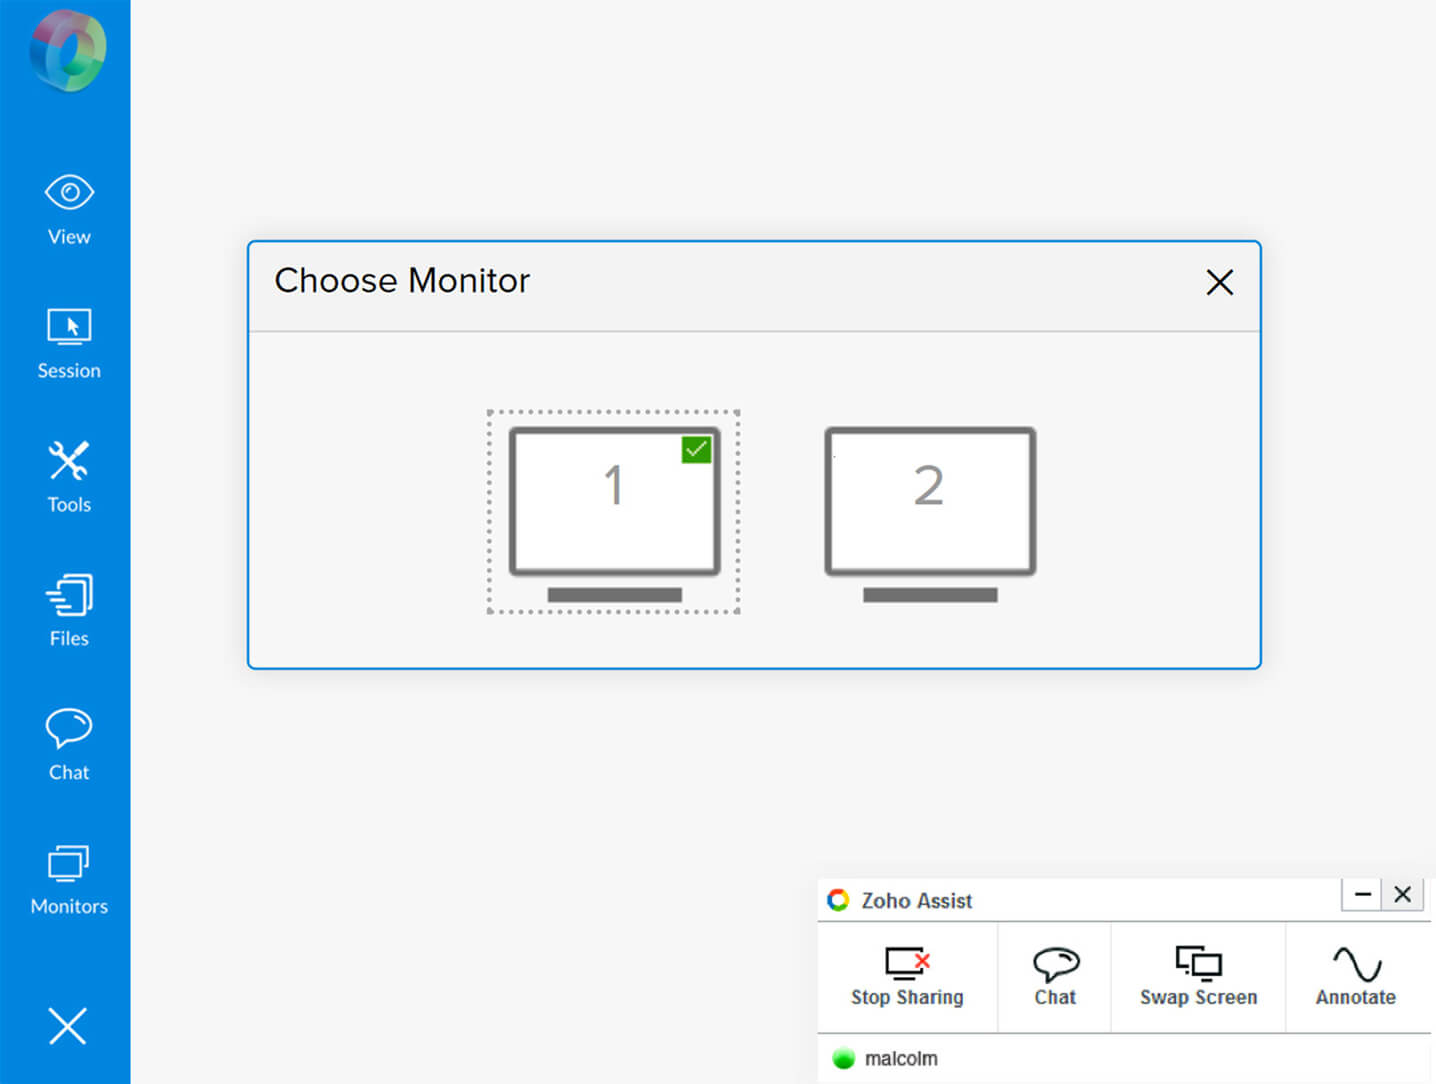 Multi-monitor navigation with Zoho Assist